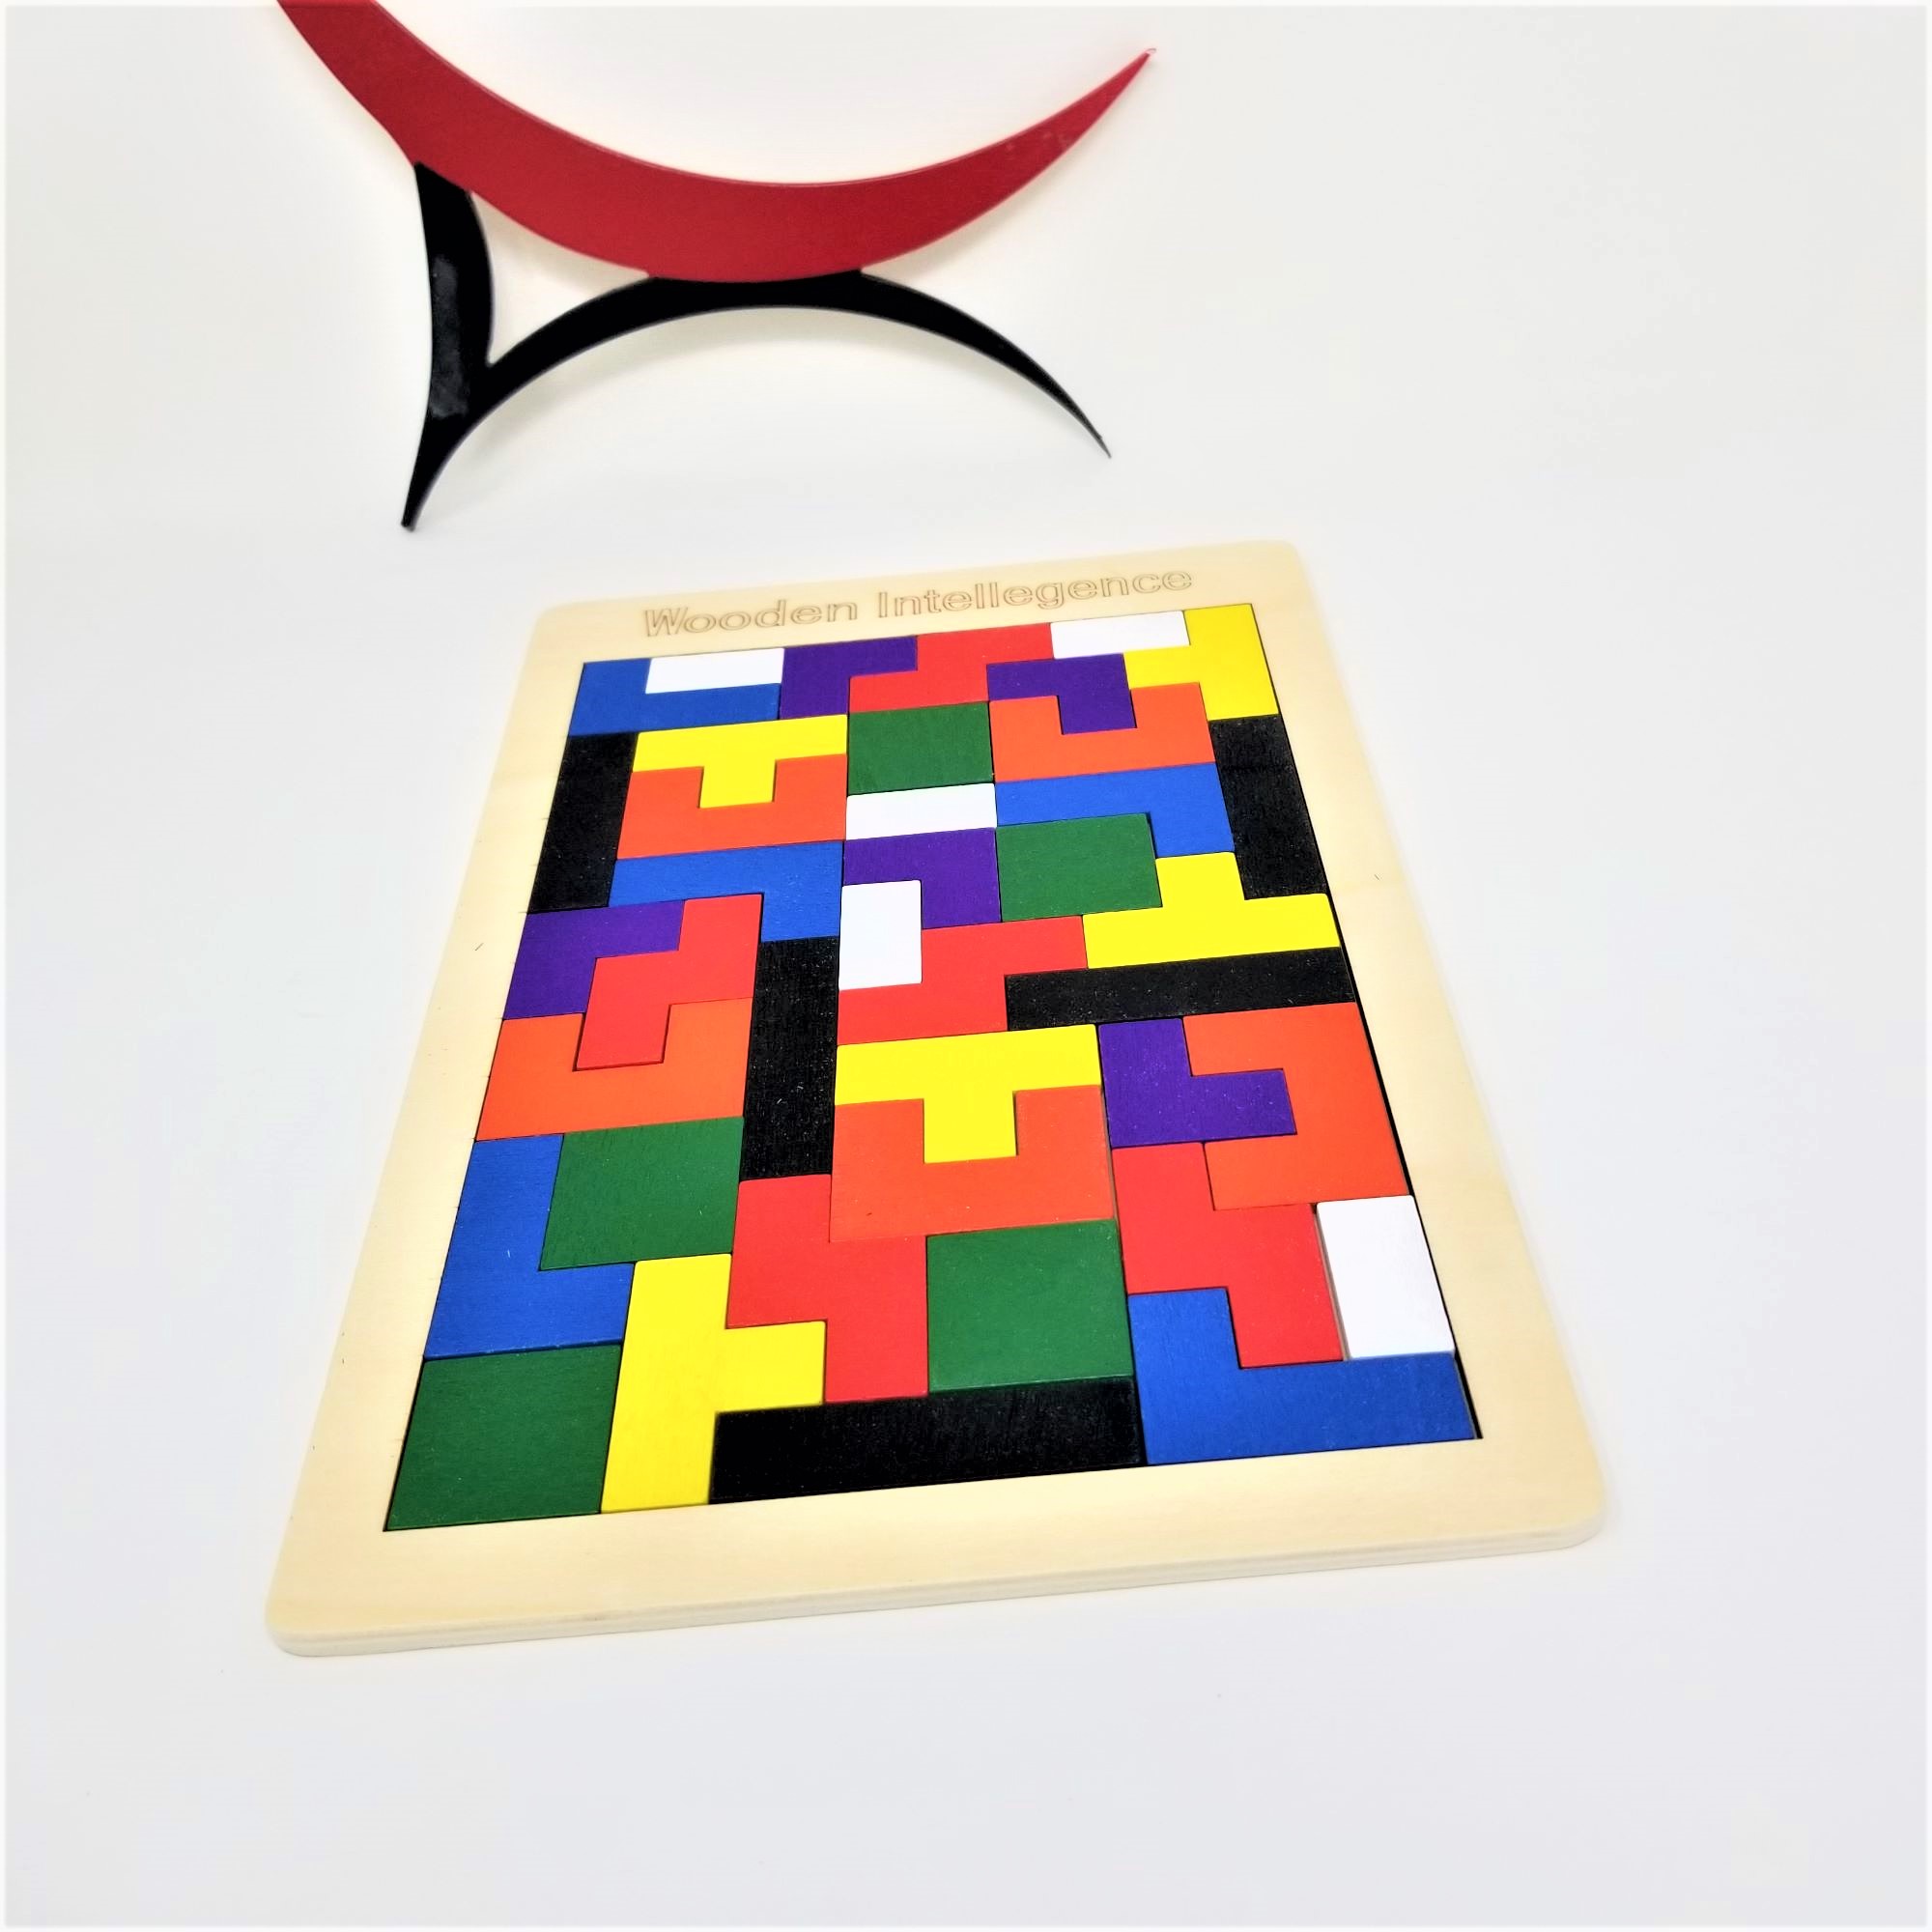 Wood Block Puzzle - Just like Tetris, but different